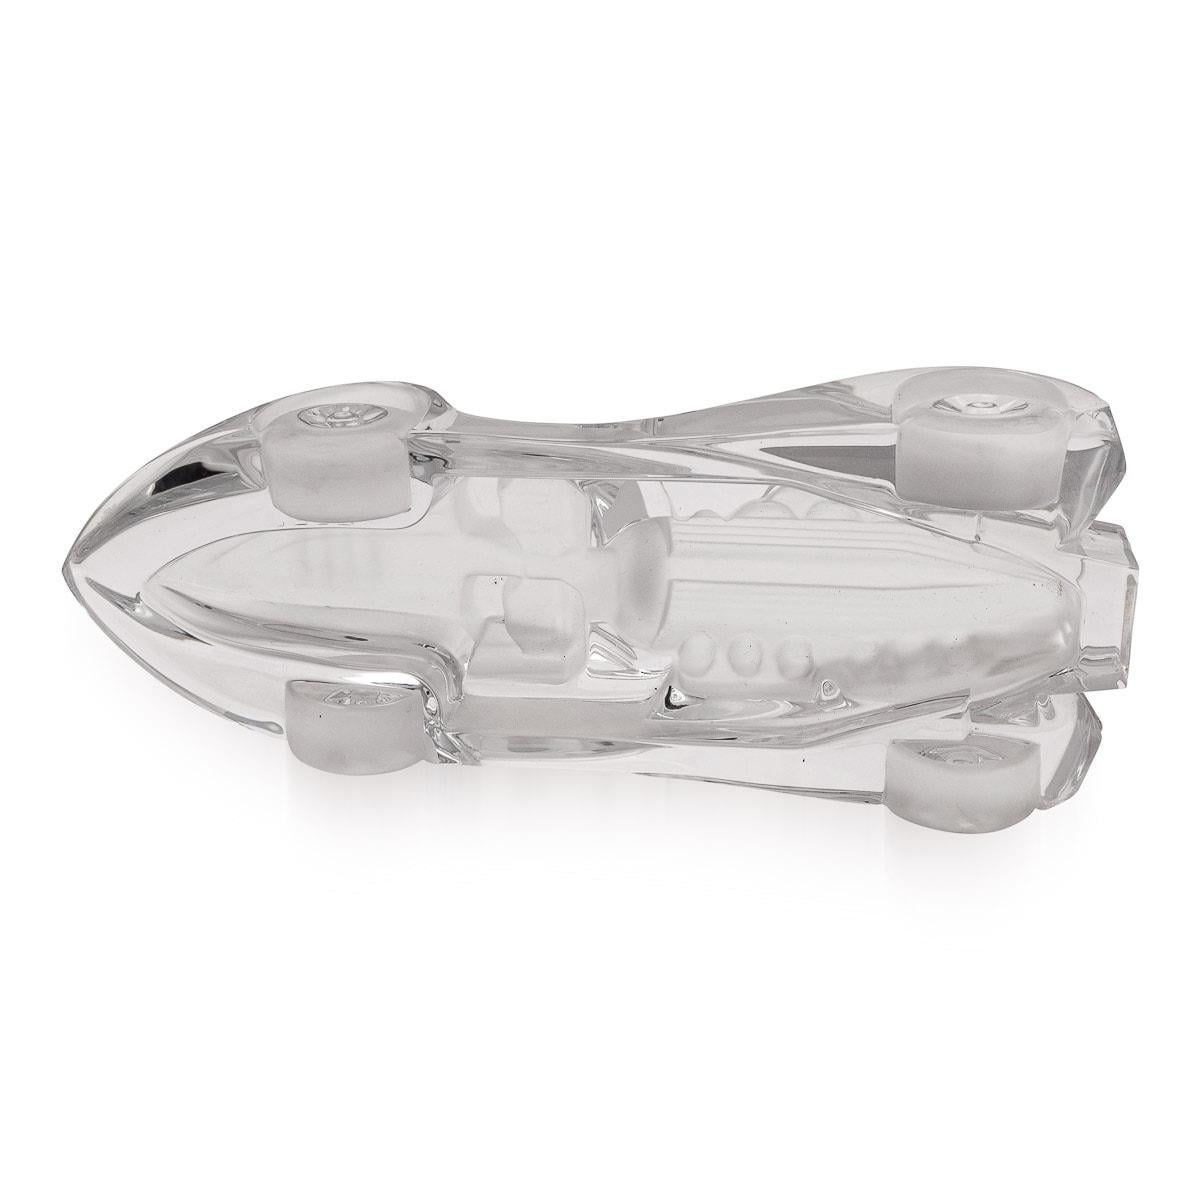 20th Century Model Glass Car By Daum, France, c.1980 For Sale 3